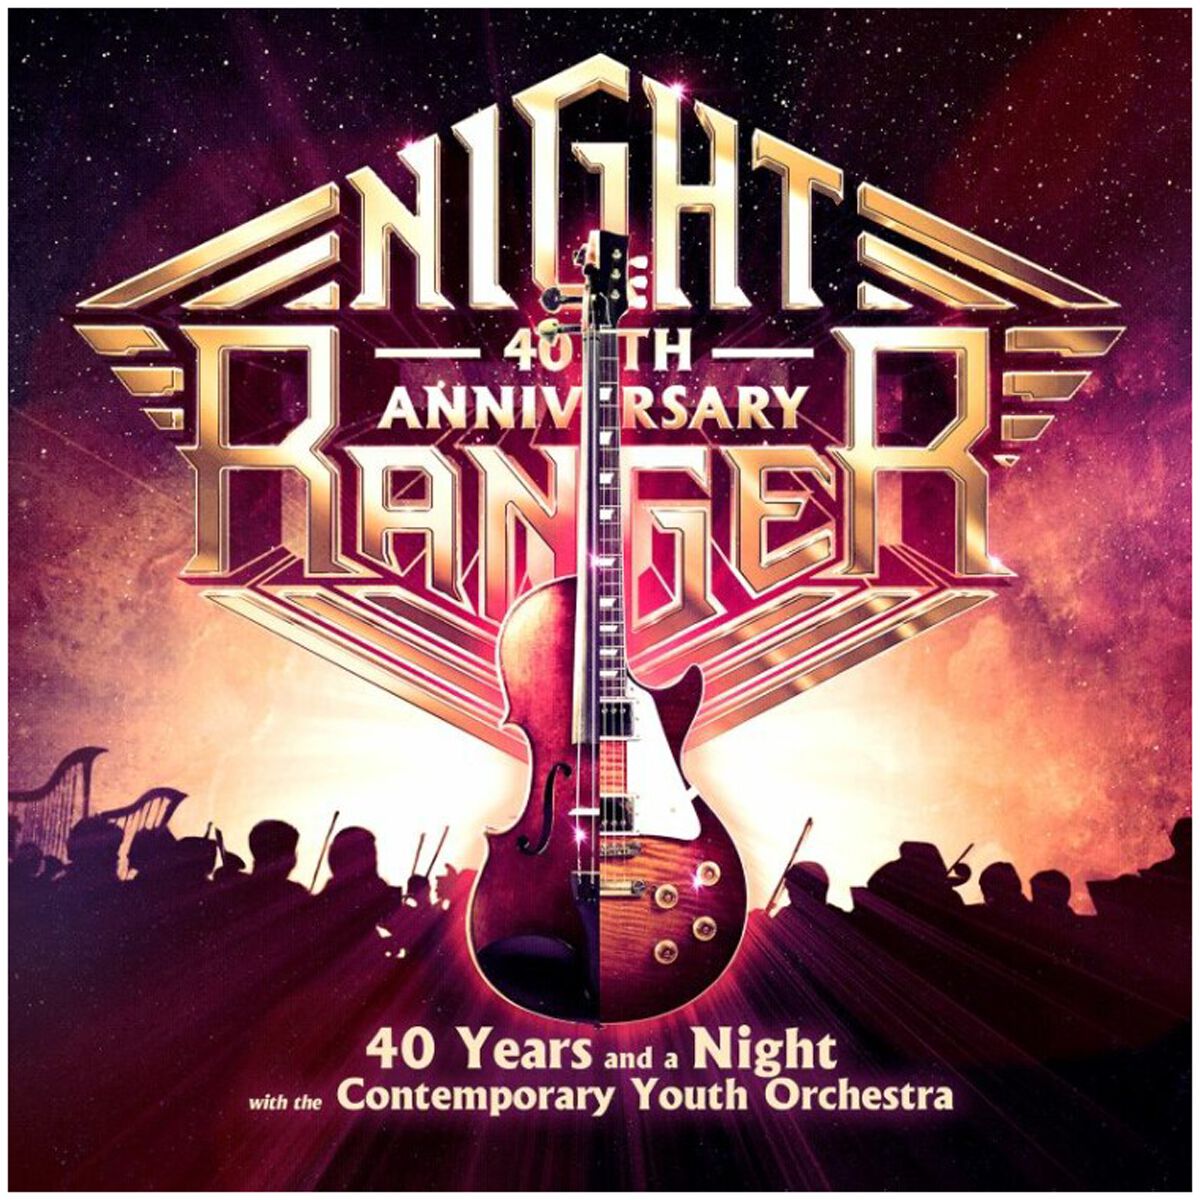 NIGHT RANGER – 40 Years and a Night with the Contemporary Youth Orchestra